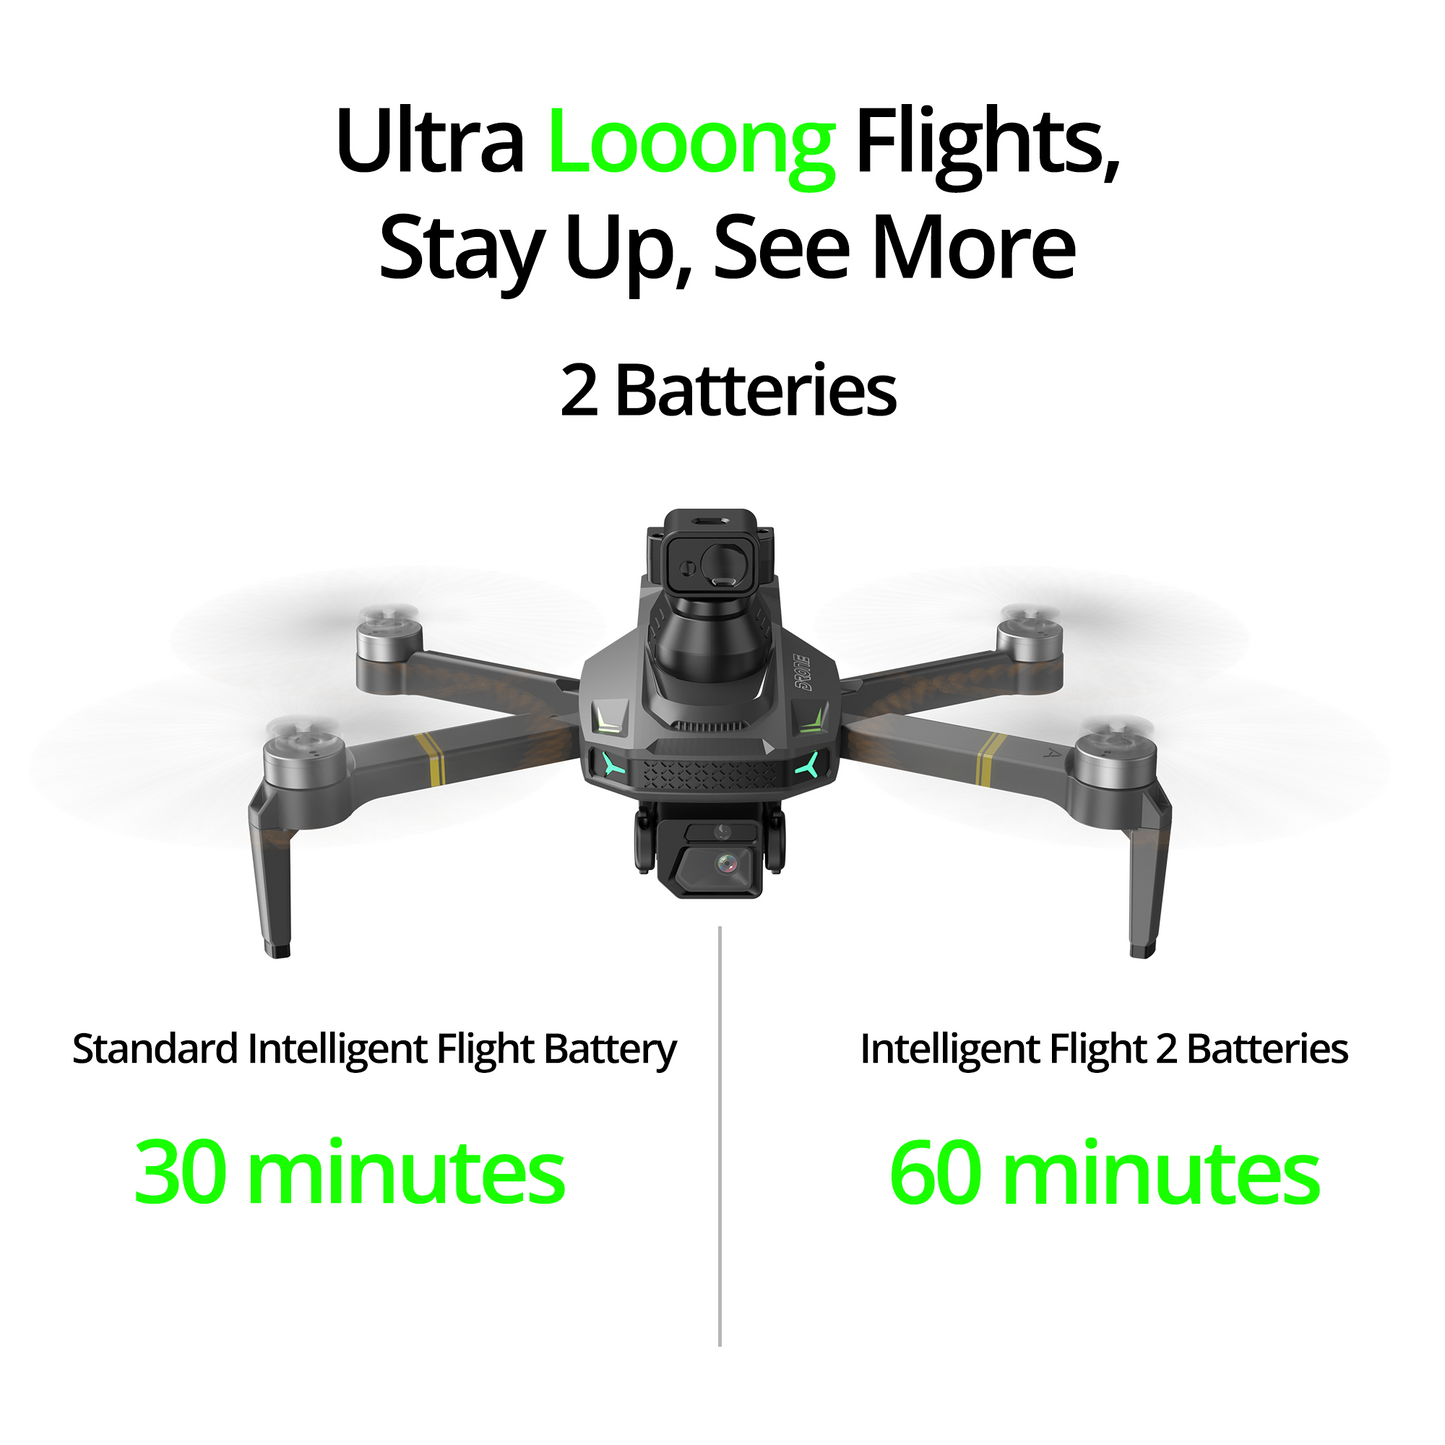 REFURBISHED: The Bigly Brothers E59 Mark III Delta Black Superior Edition, 30-Min Flight Time, Obstacle Avoidance Drone with Camera, 720 Degrees of Obstacle Avoidance Drone with Carrying Case Below 249g